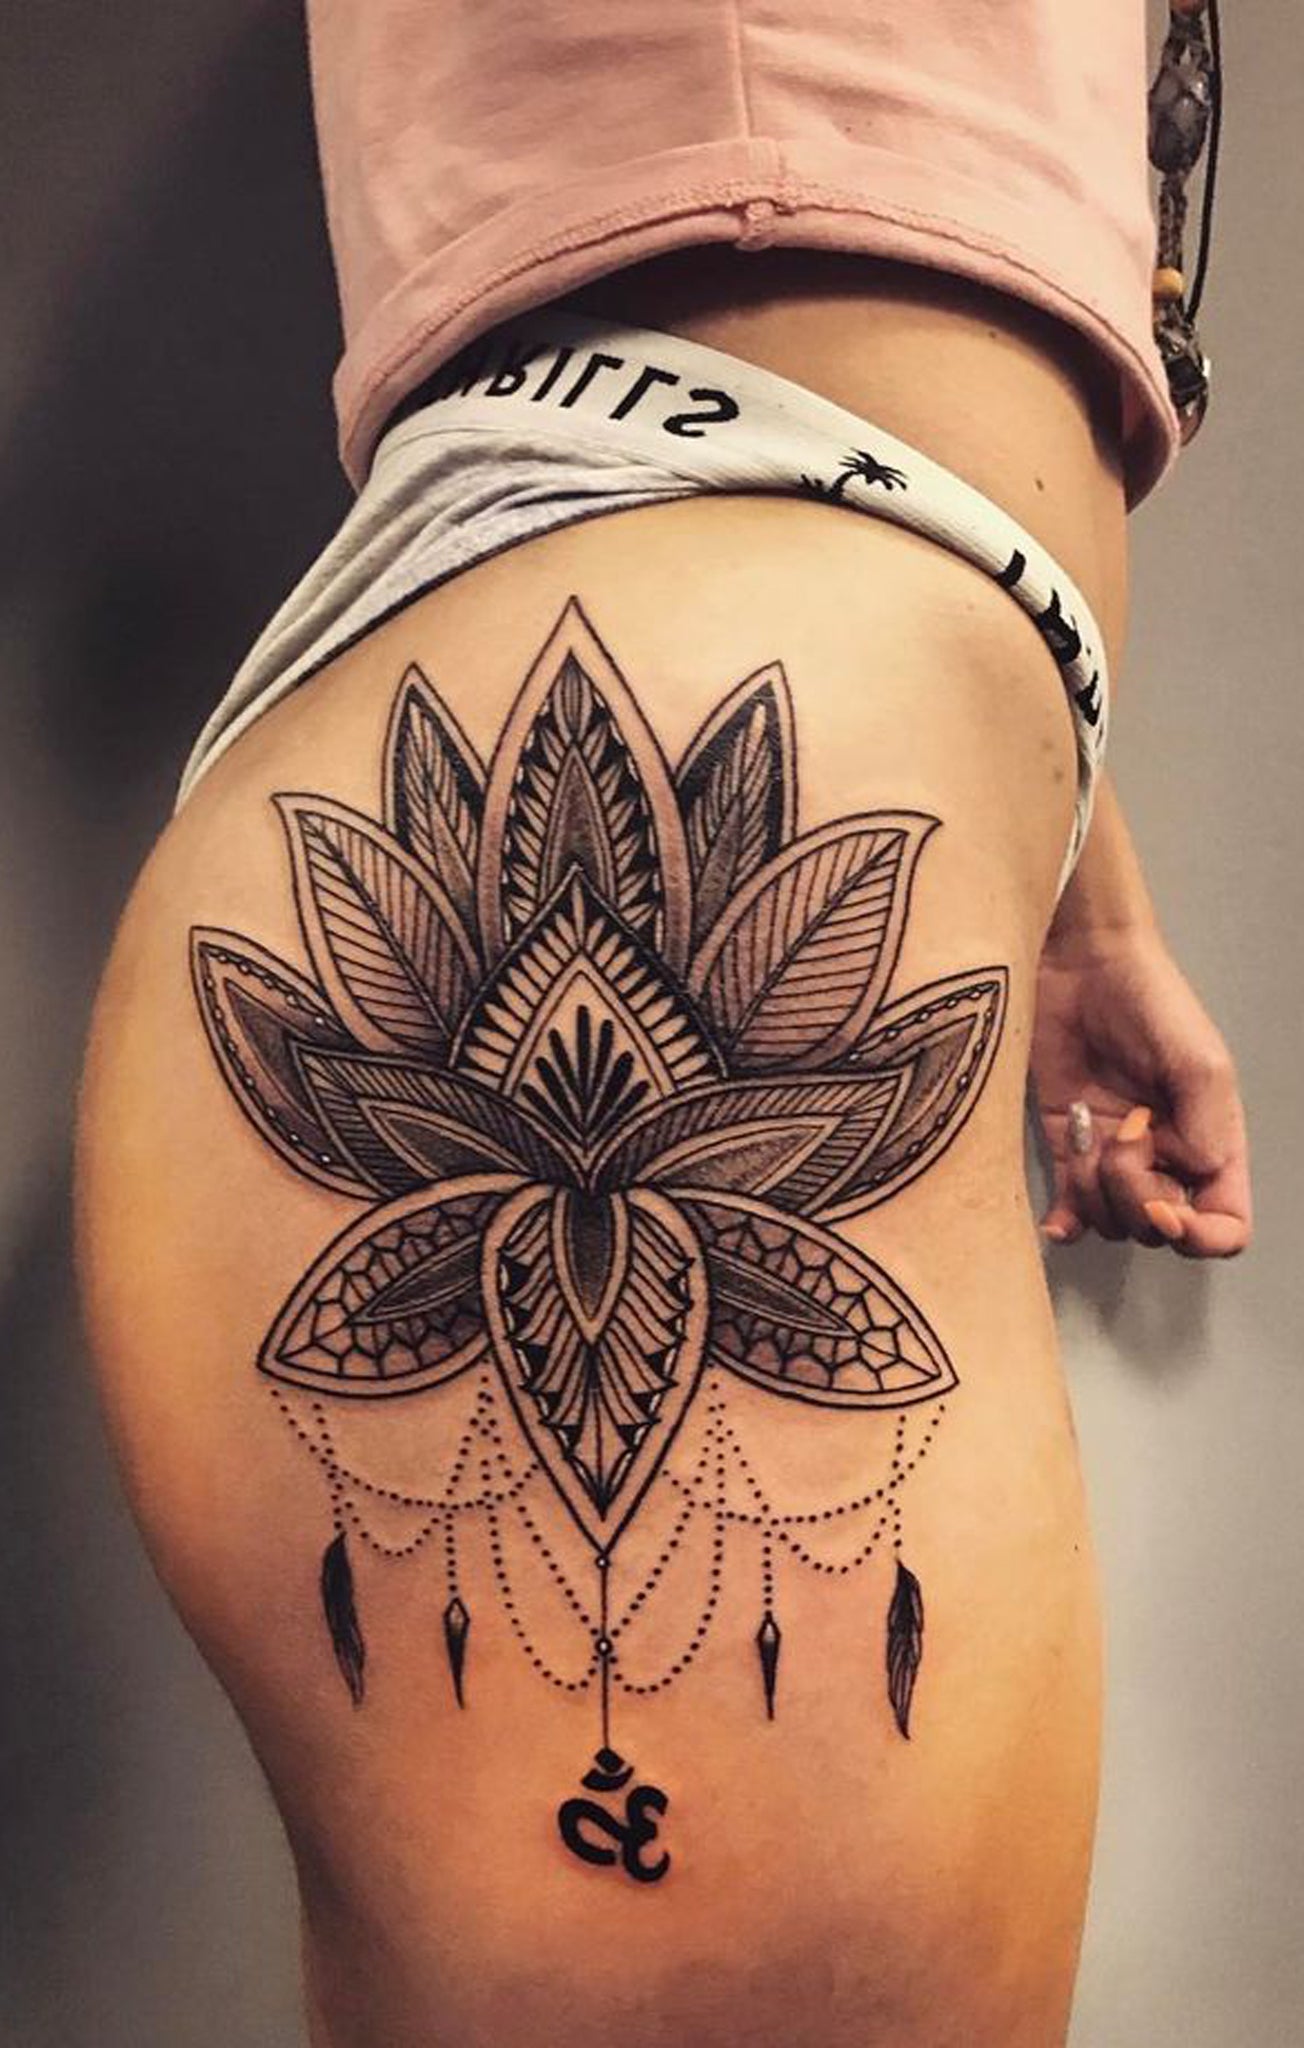 16 Awesome Tribal Thigh Tattoos  Only Tribal